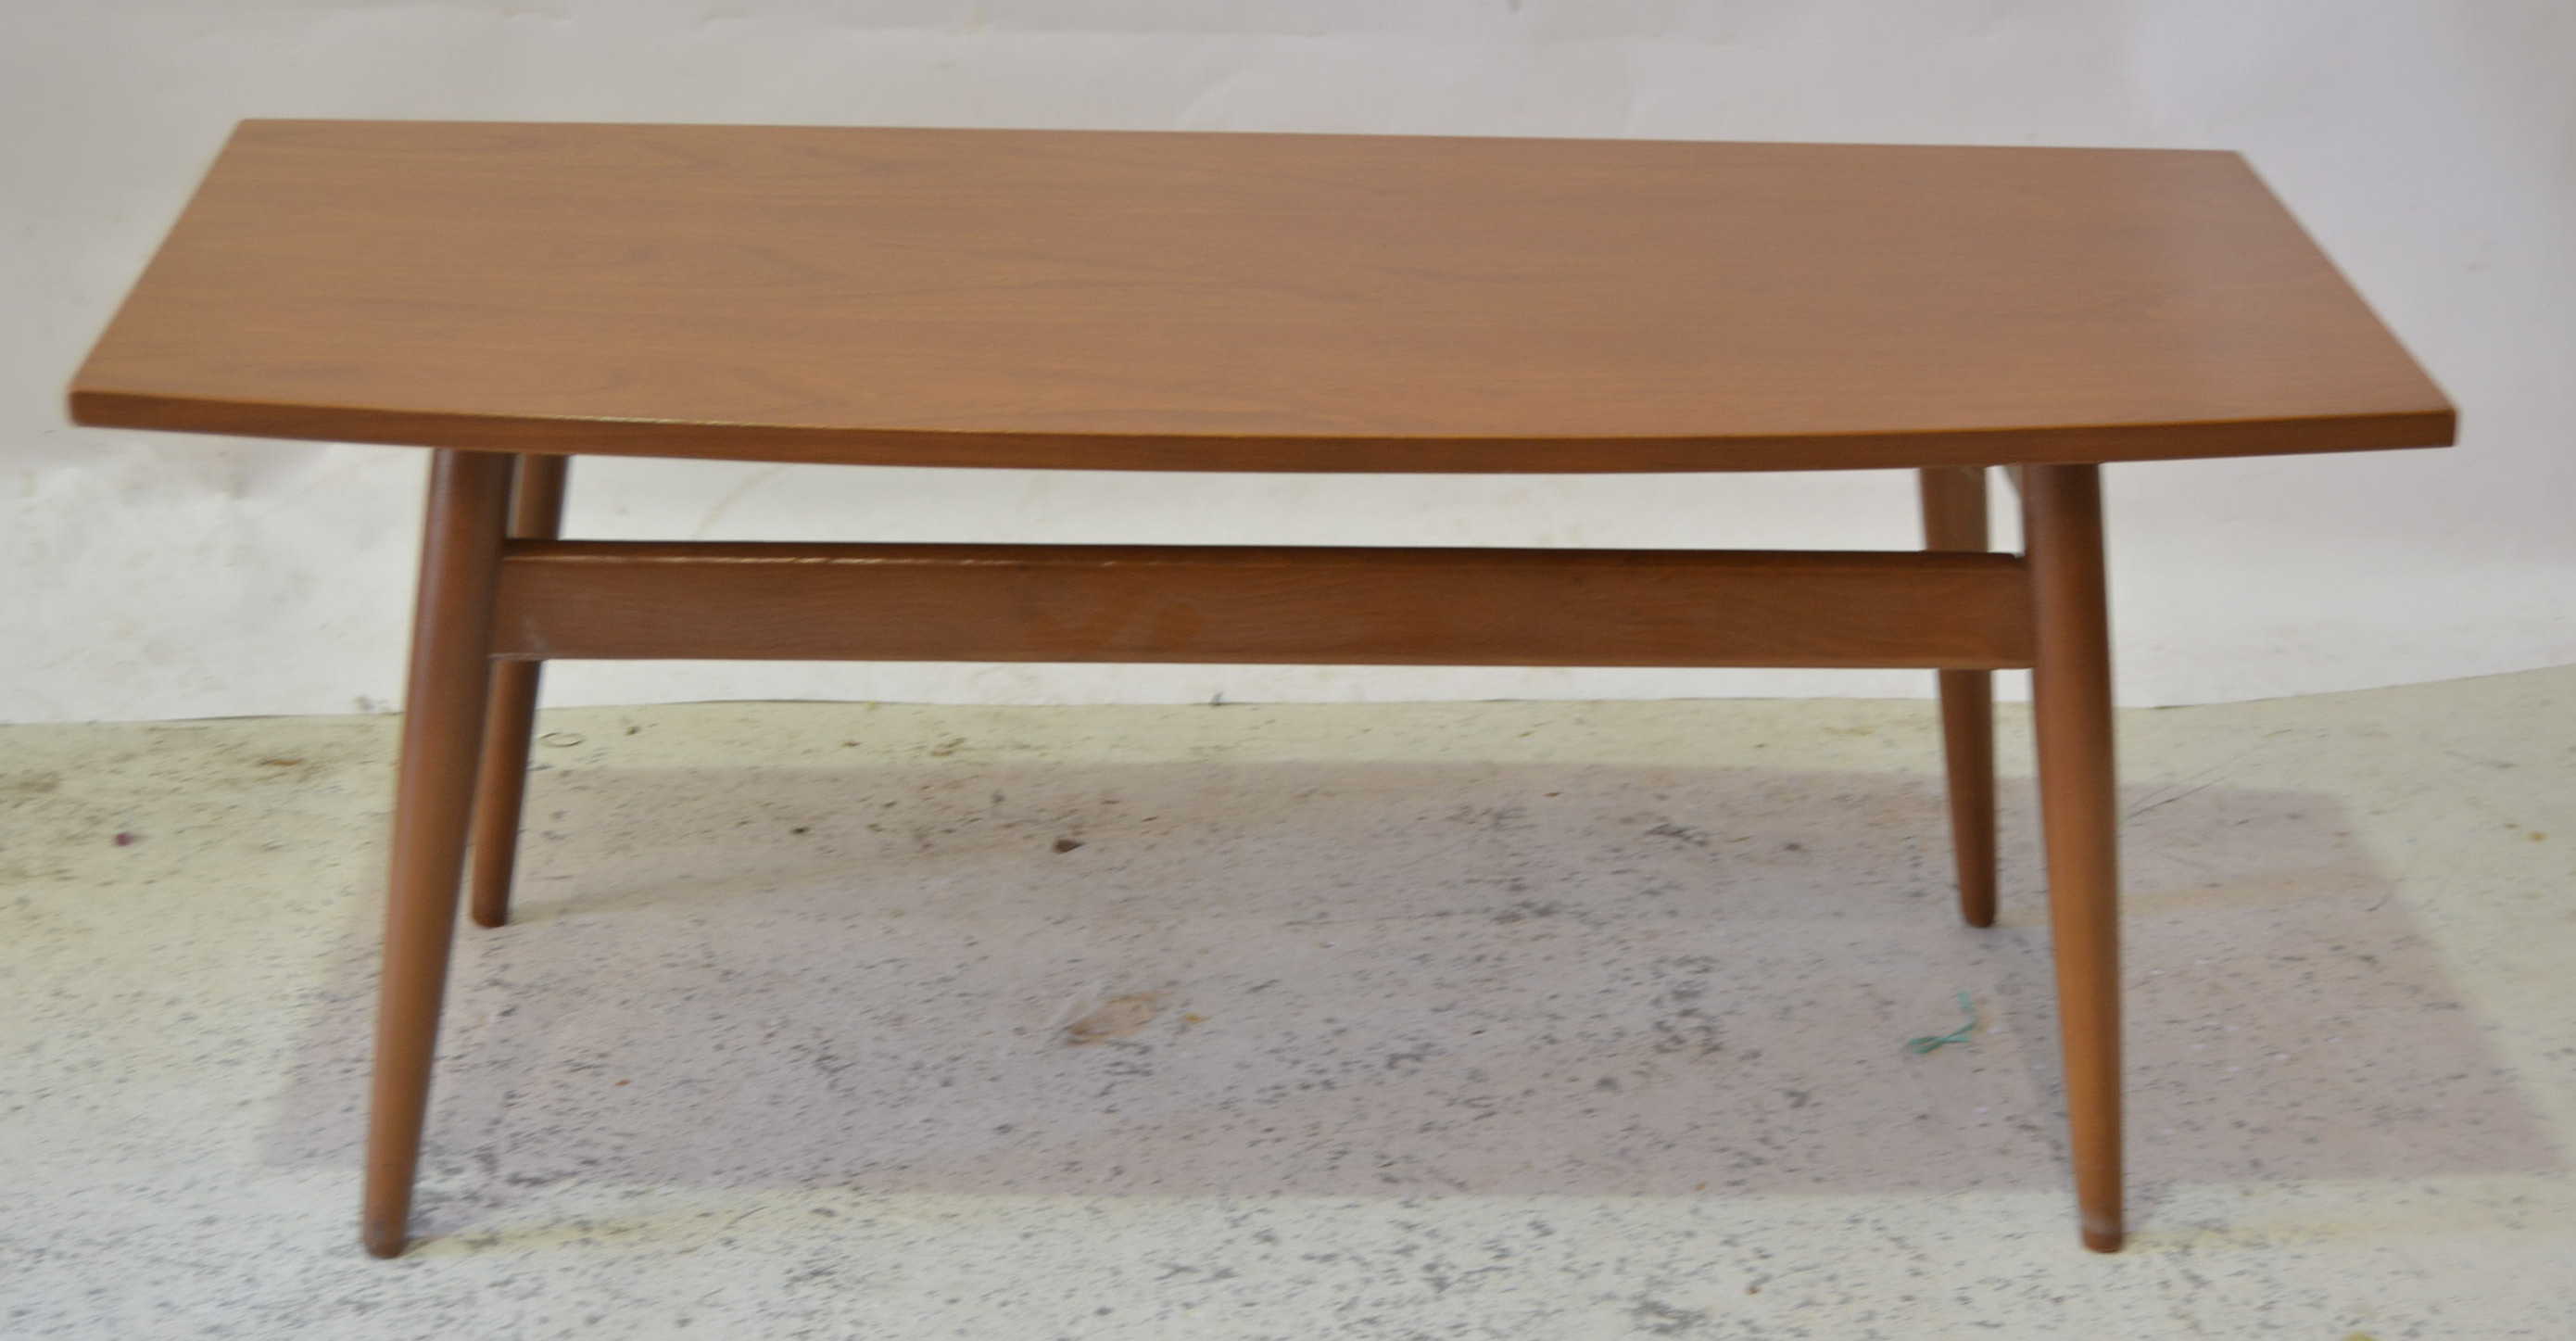 Scandart Limited 1960s teak coffee table, shaped rectangular top on tapered suports,bears label,